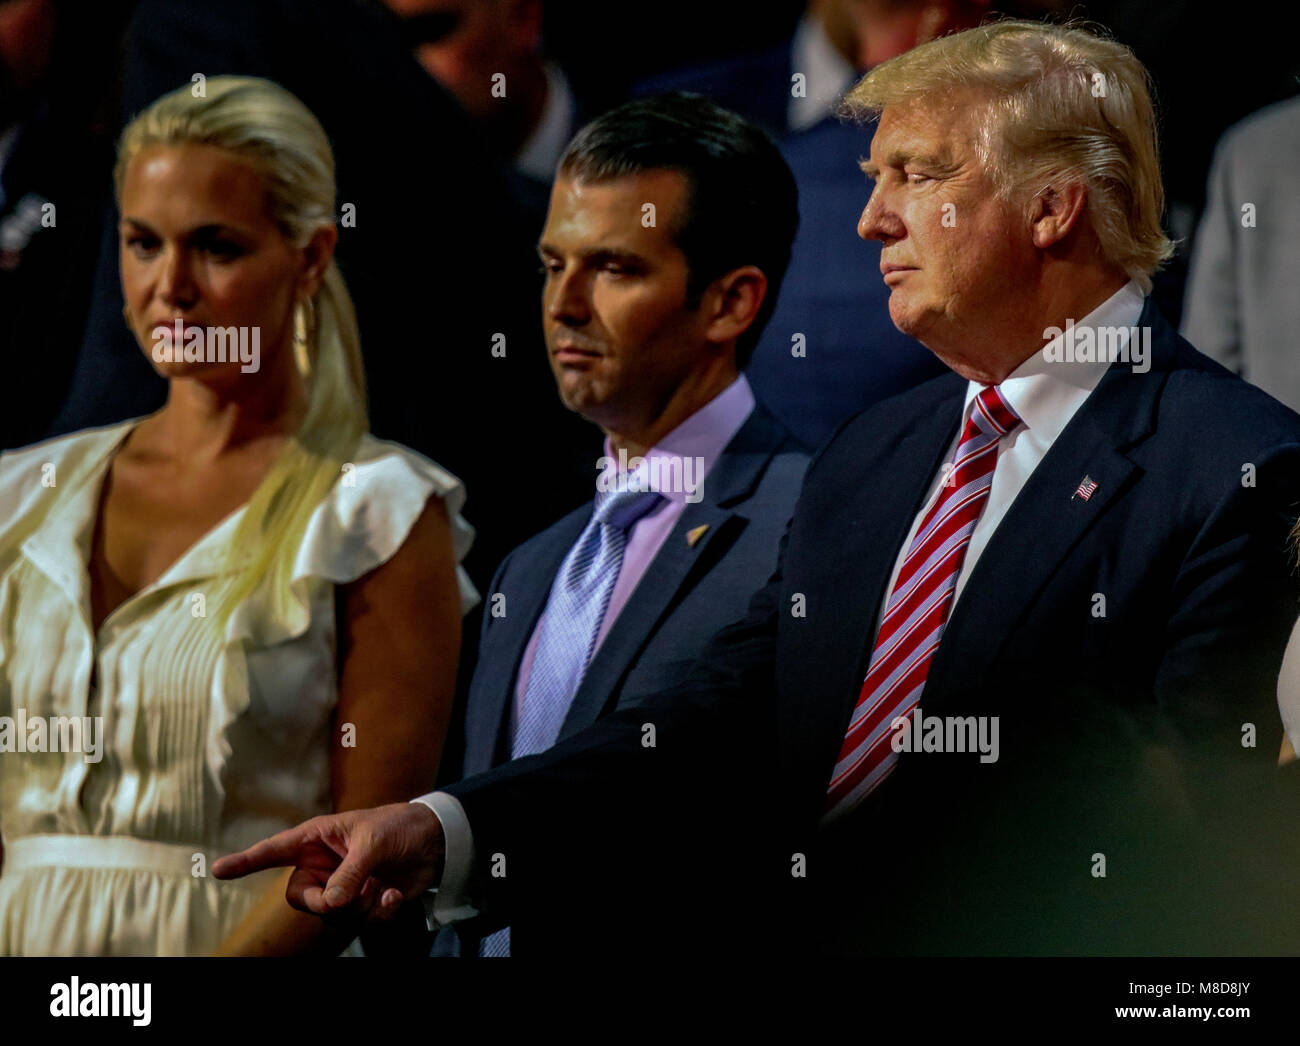 Cleveland, Ohio, USA, 20th July, 2016 Vanessa Trump her husband Donald Trump Jr. Presidentil candidate Donald Trump stand together during the Republican National Convention in the Quicken Arena. Credit: Mark Reinstein/MediaPunch Stock Photo